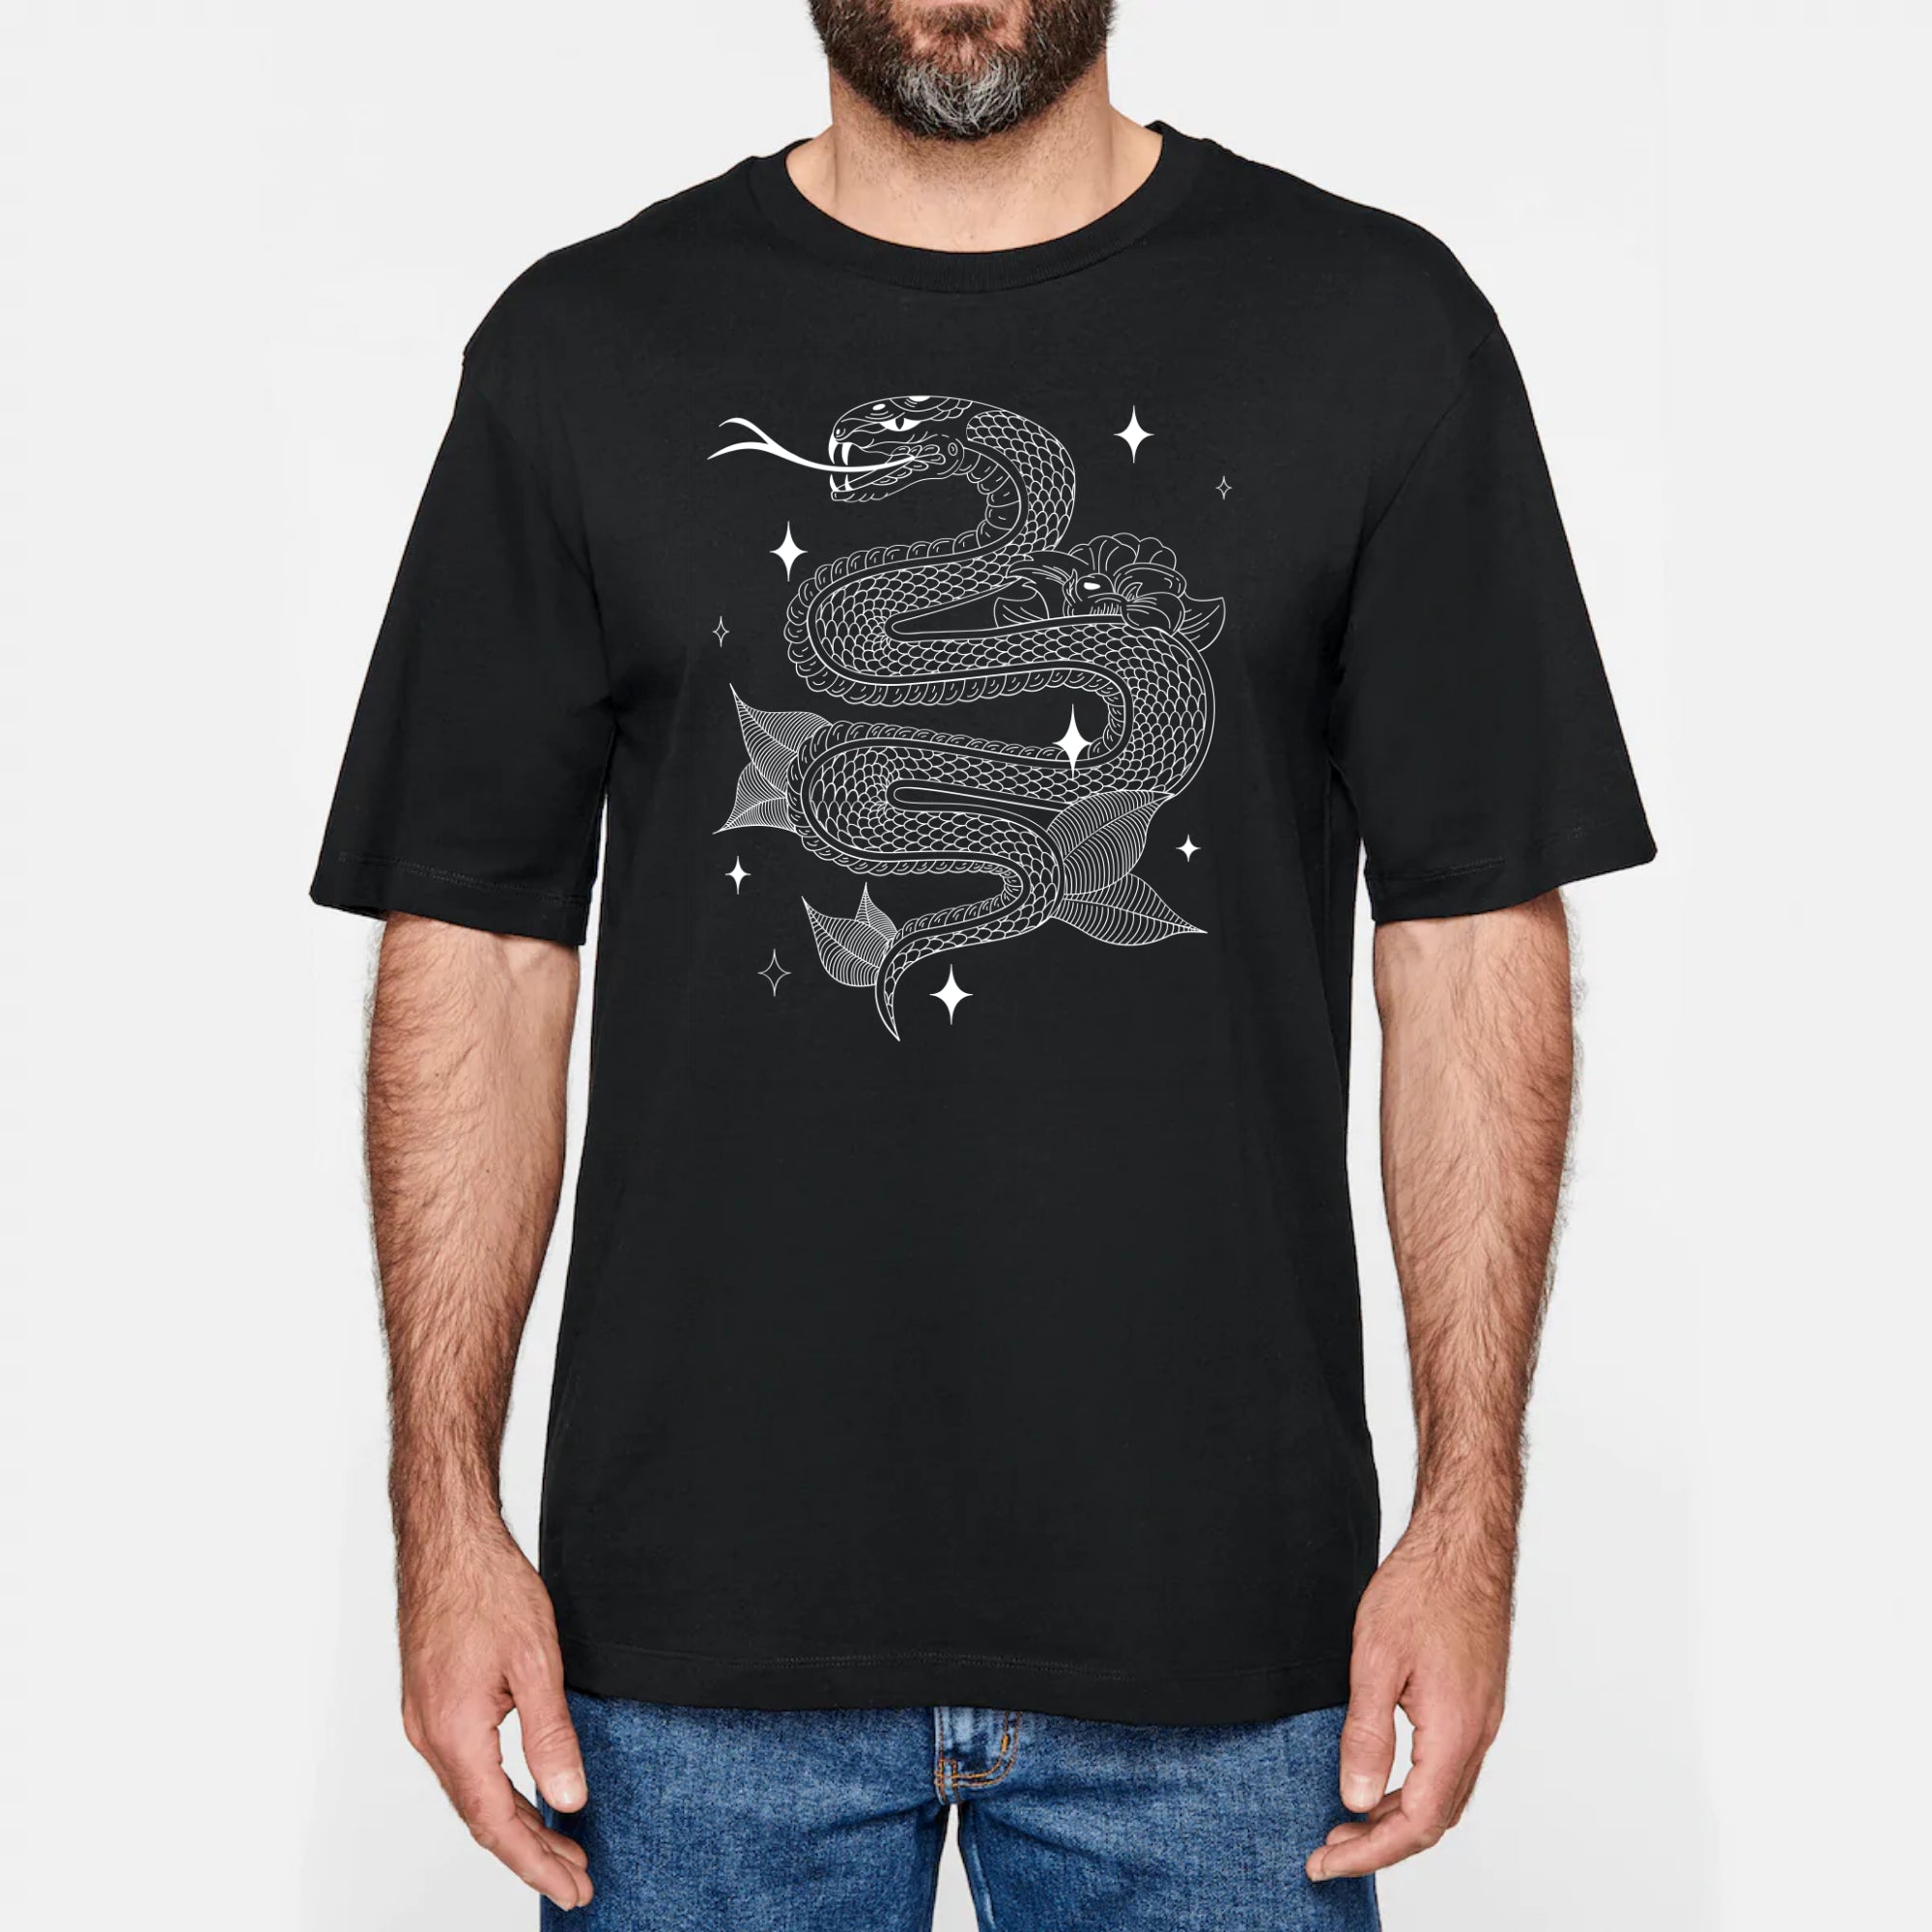 T-shirt - Chinese dragon -  from chtmboutique by T-Pop - JAPANESE DRAGON